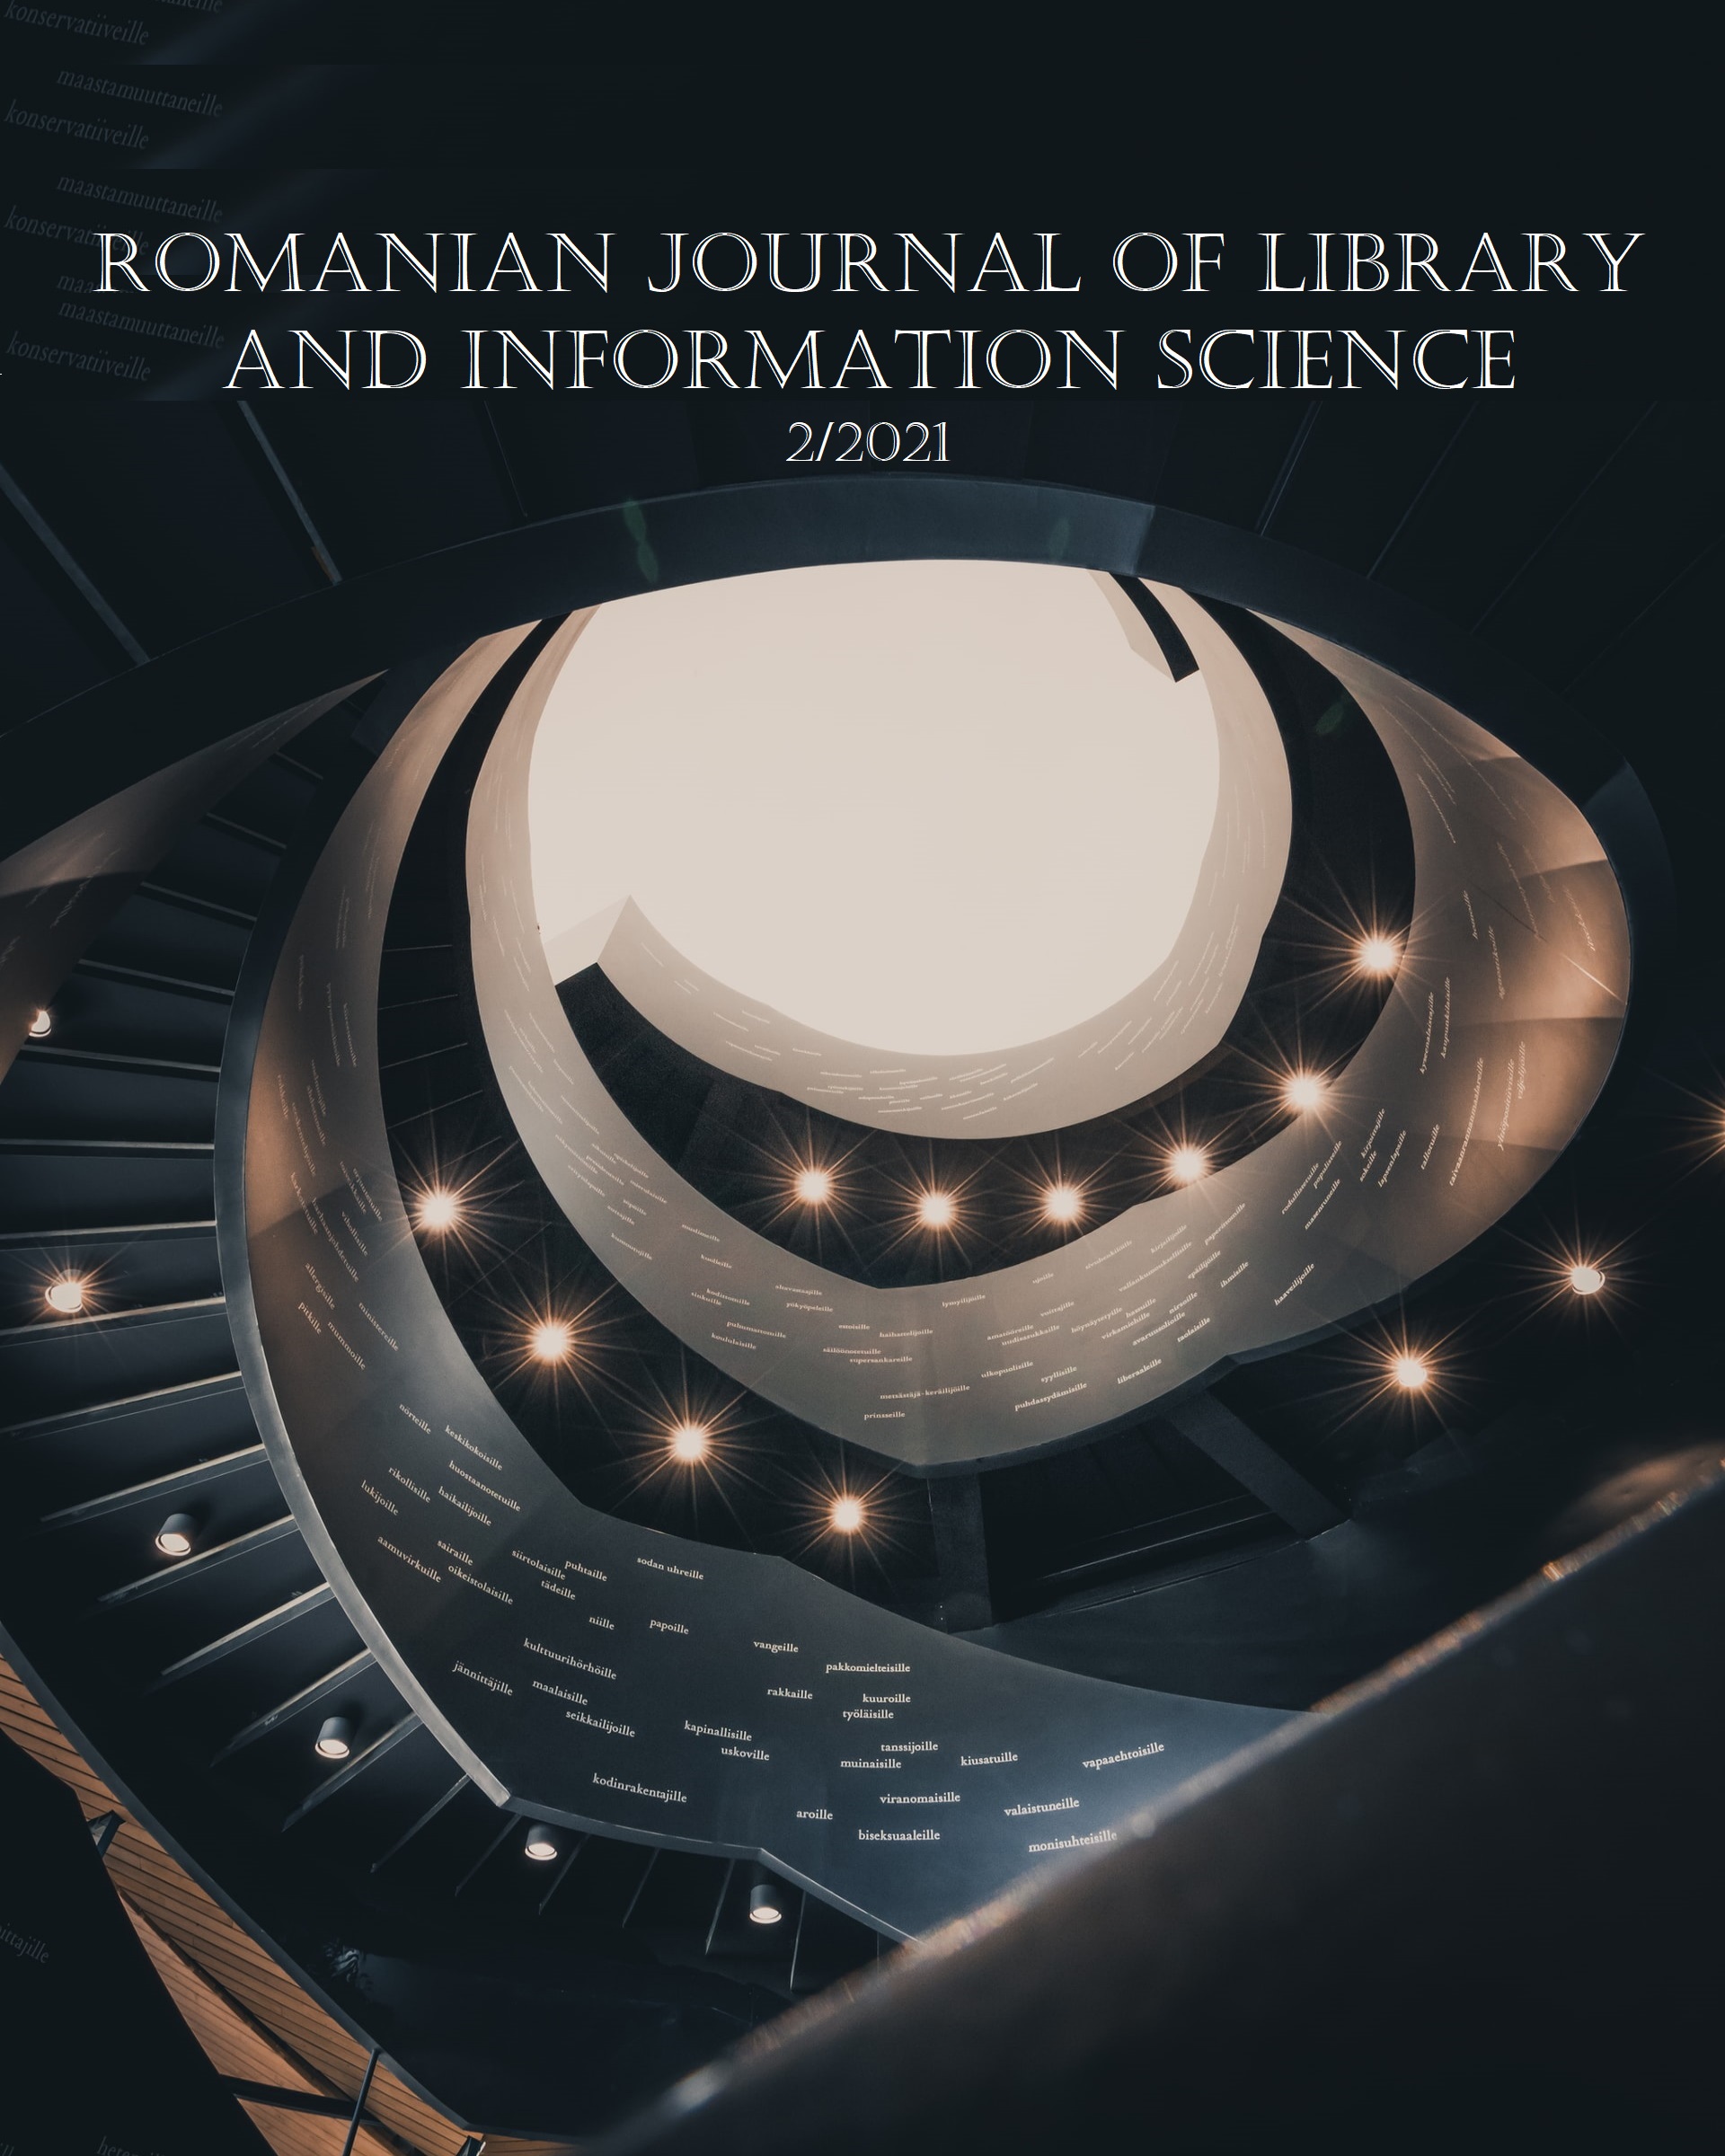 National Bibliographic Database for Research Outputs in the Republic of Moldova: Overview and Review